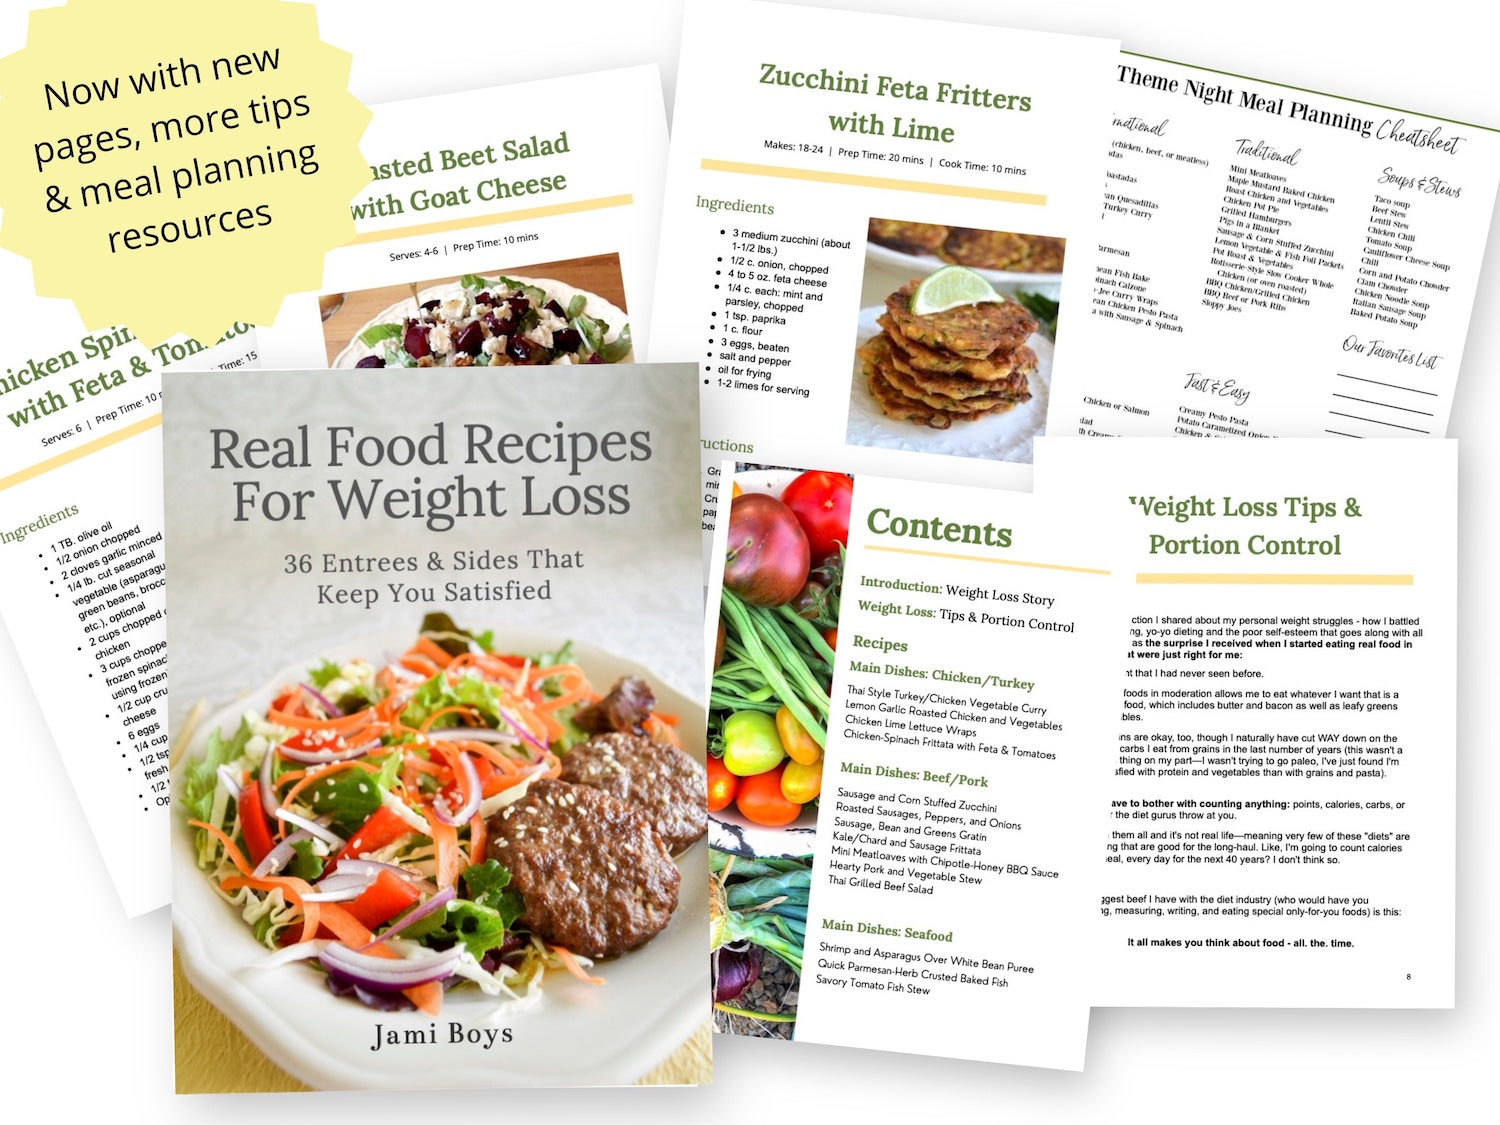 Real Food Recipes For Weight Loss (Download, Print at Home)